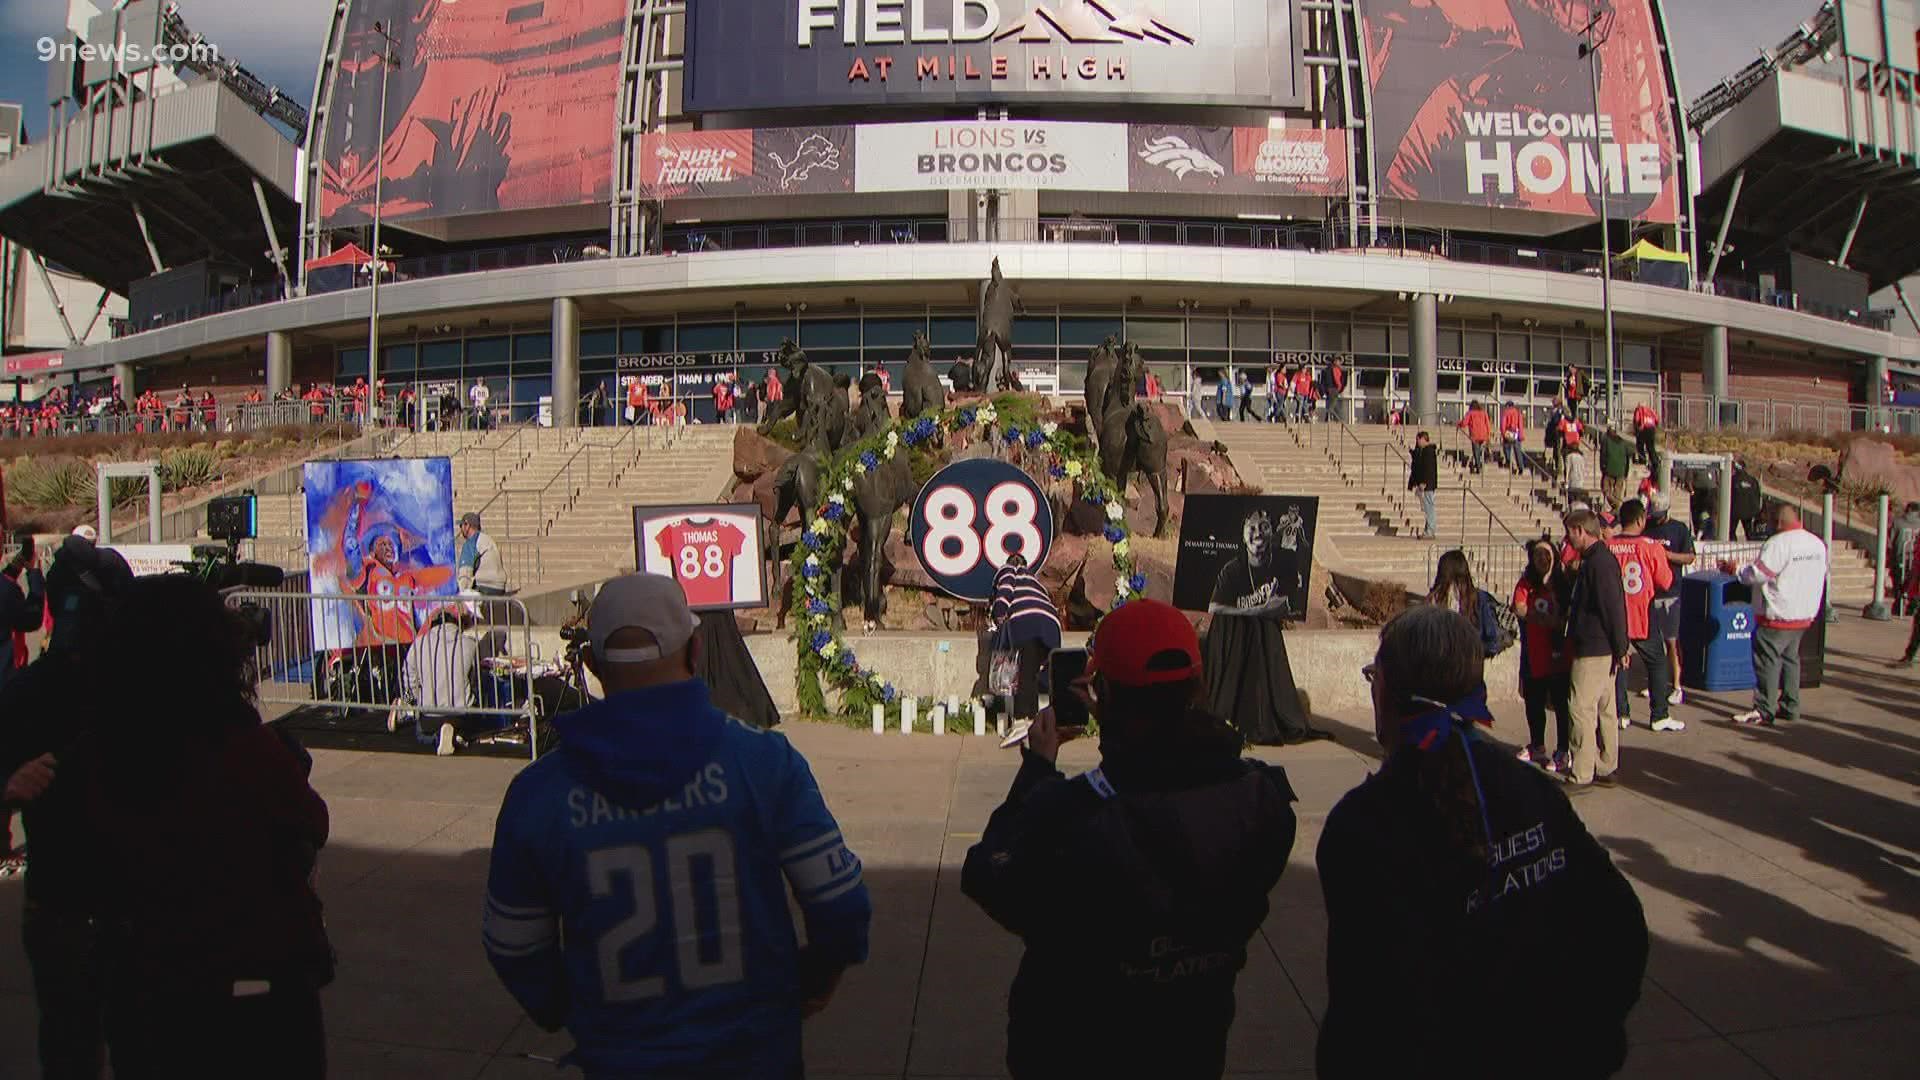 The team held special tributes both inside and outside the stadium.